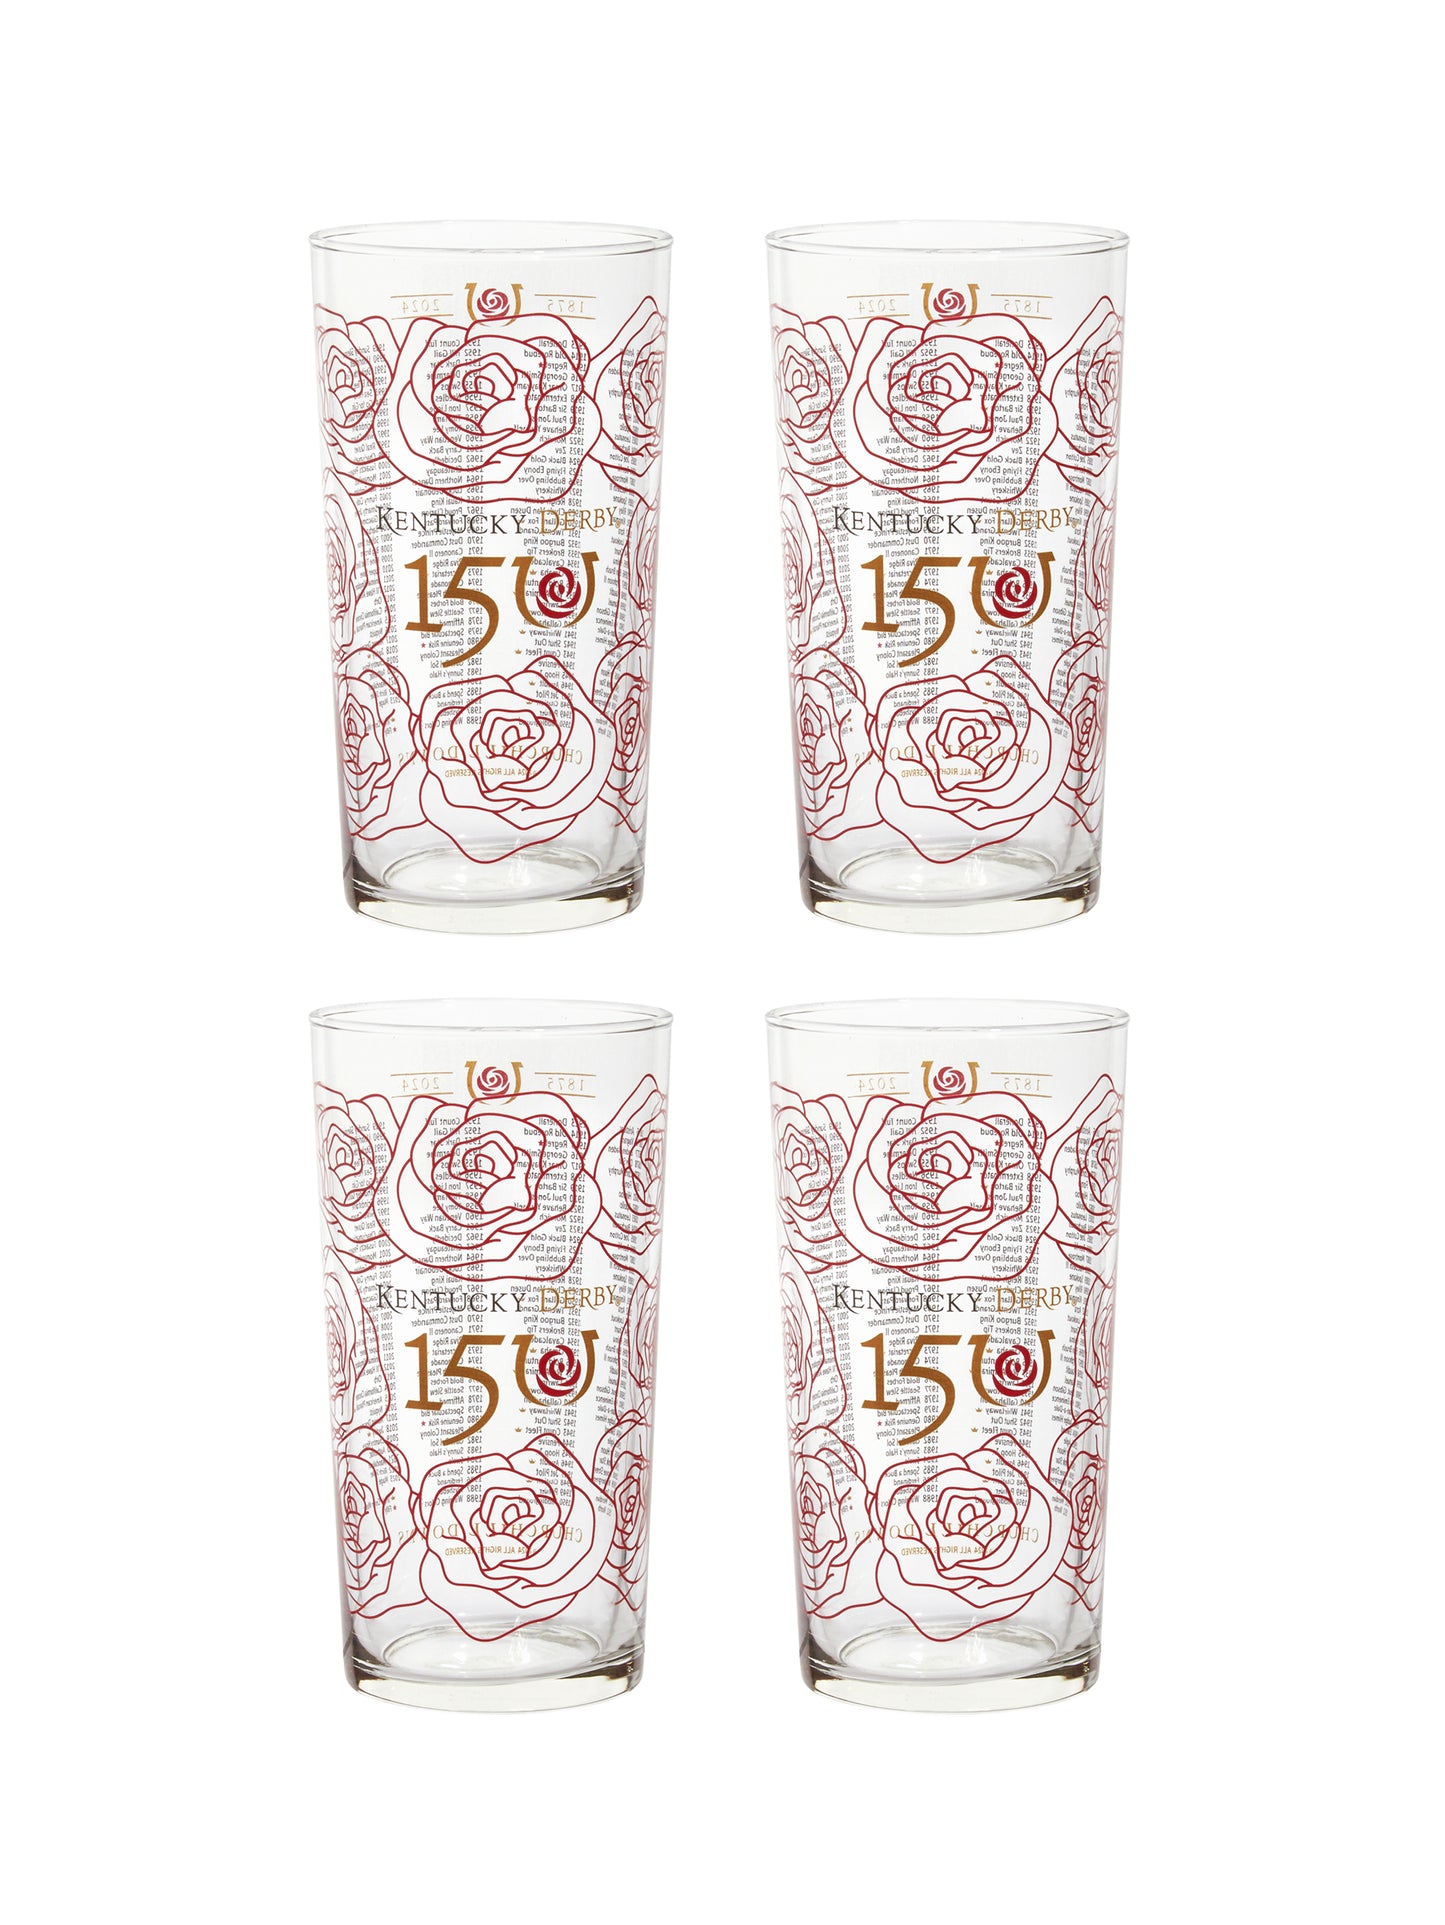 Kentucky Derby 150th Mint Julep Glasses Set of Four Weston Table